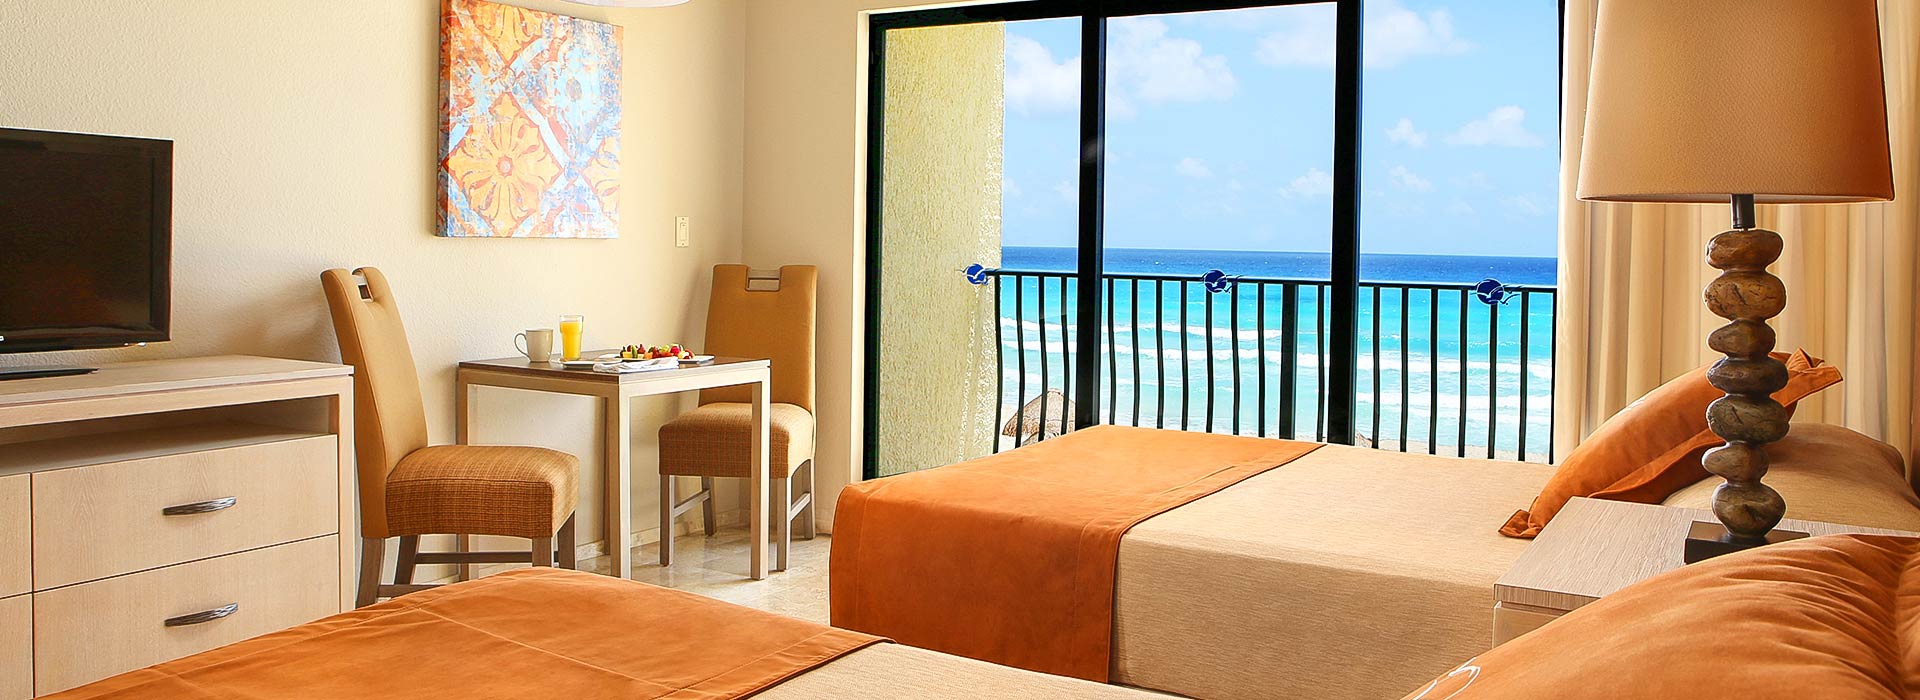 Ocean view villas with two bedroom suites and two double beds in The Royal Sands All Inclusive